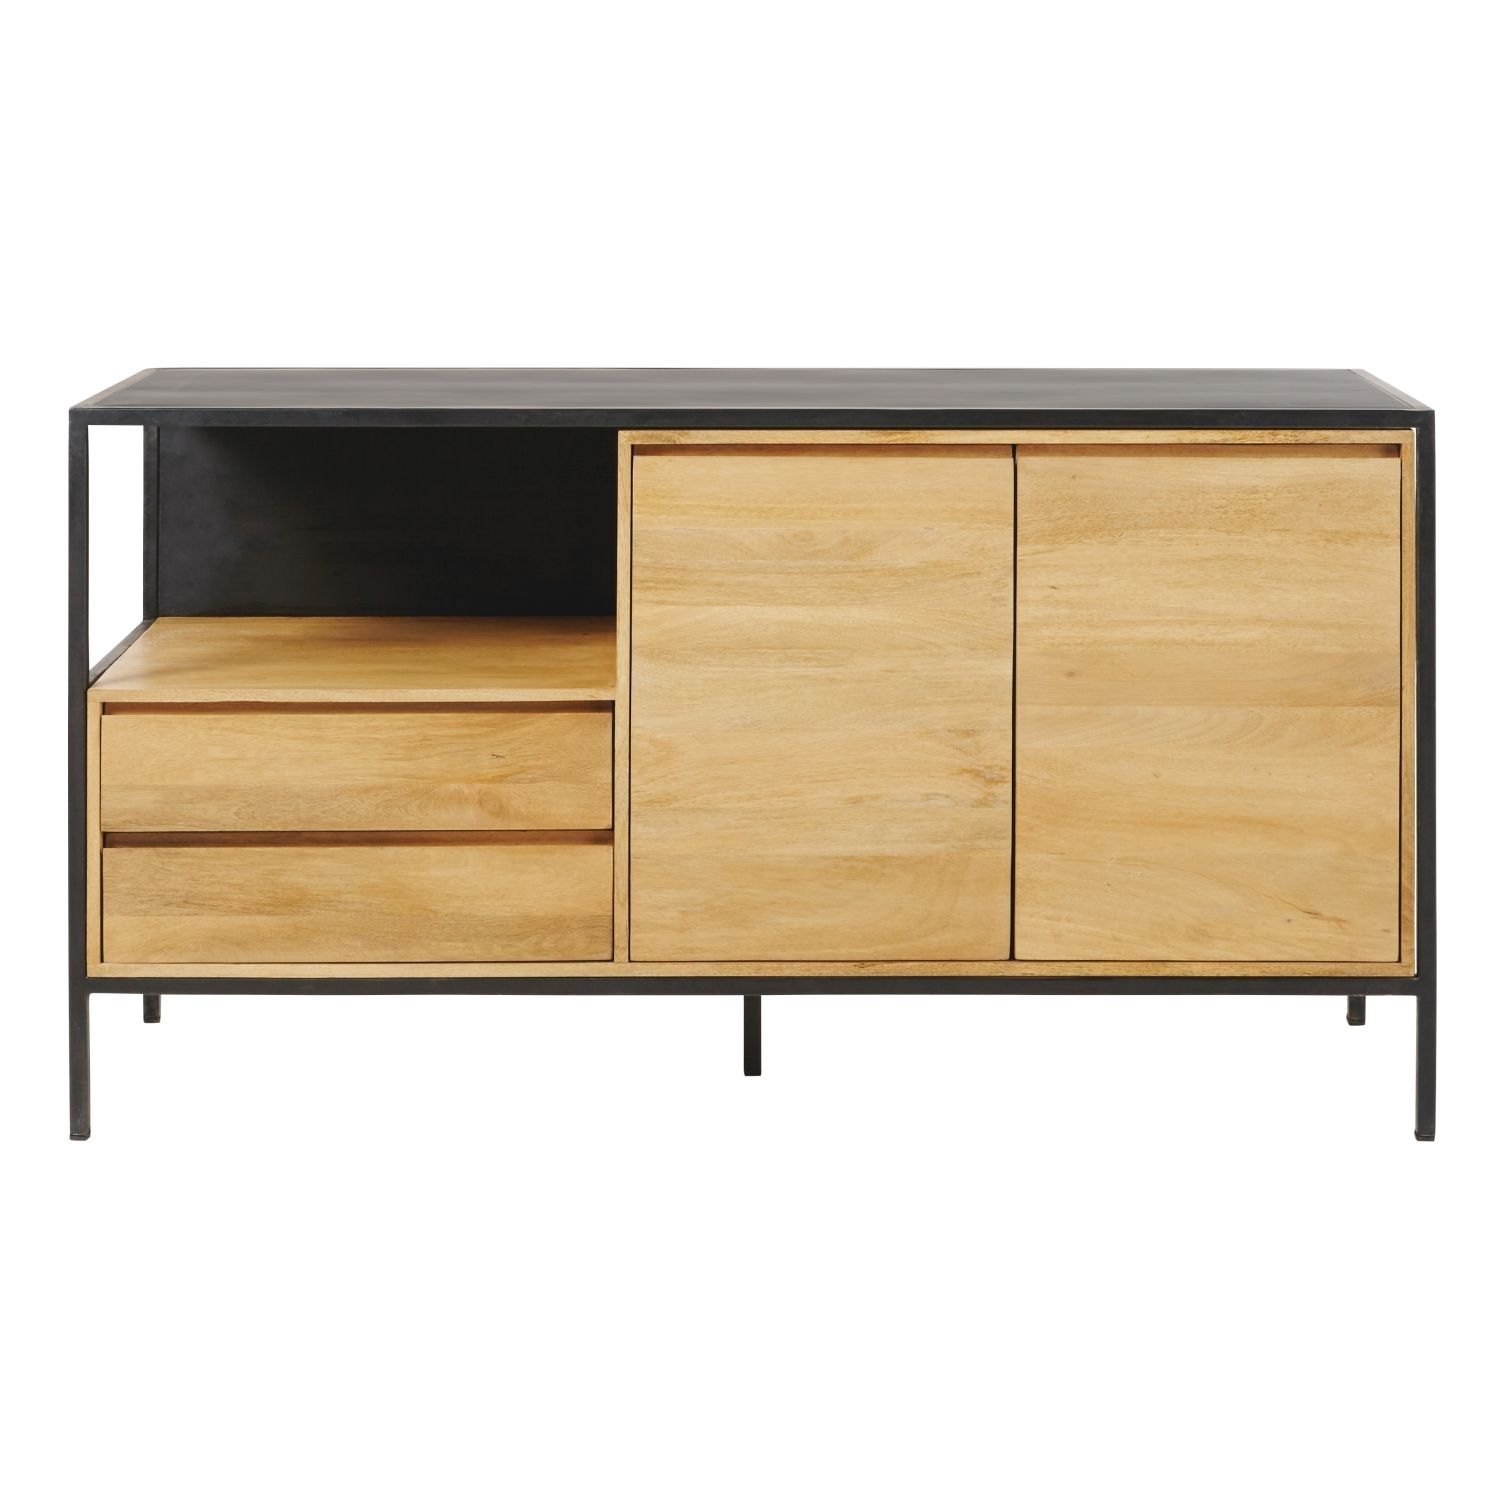 Solid Mango Wood And Black Metal 2 Door 2 Drawer Sideboard | Maisons With Current Mango Wood 2 Door/2 Drawer Sideboards (View 5 of 20)